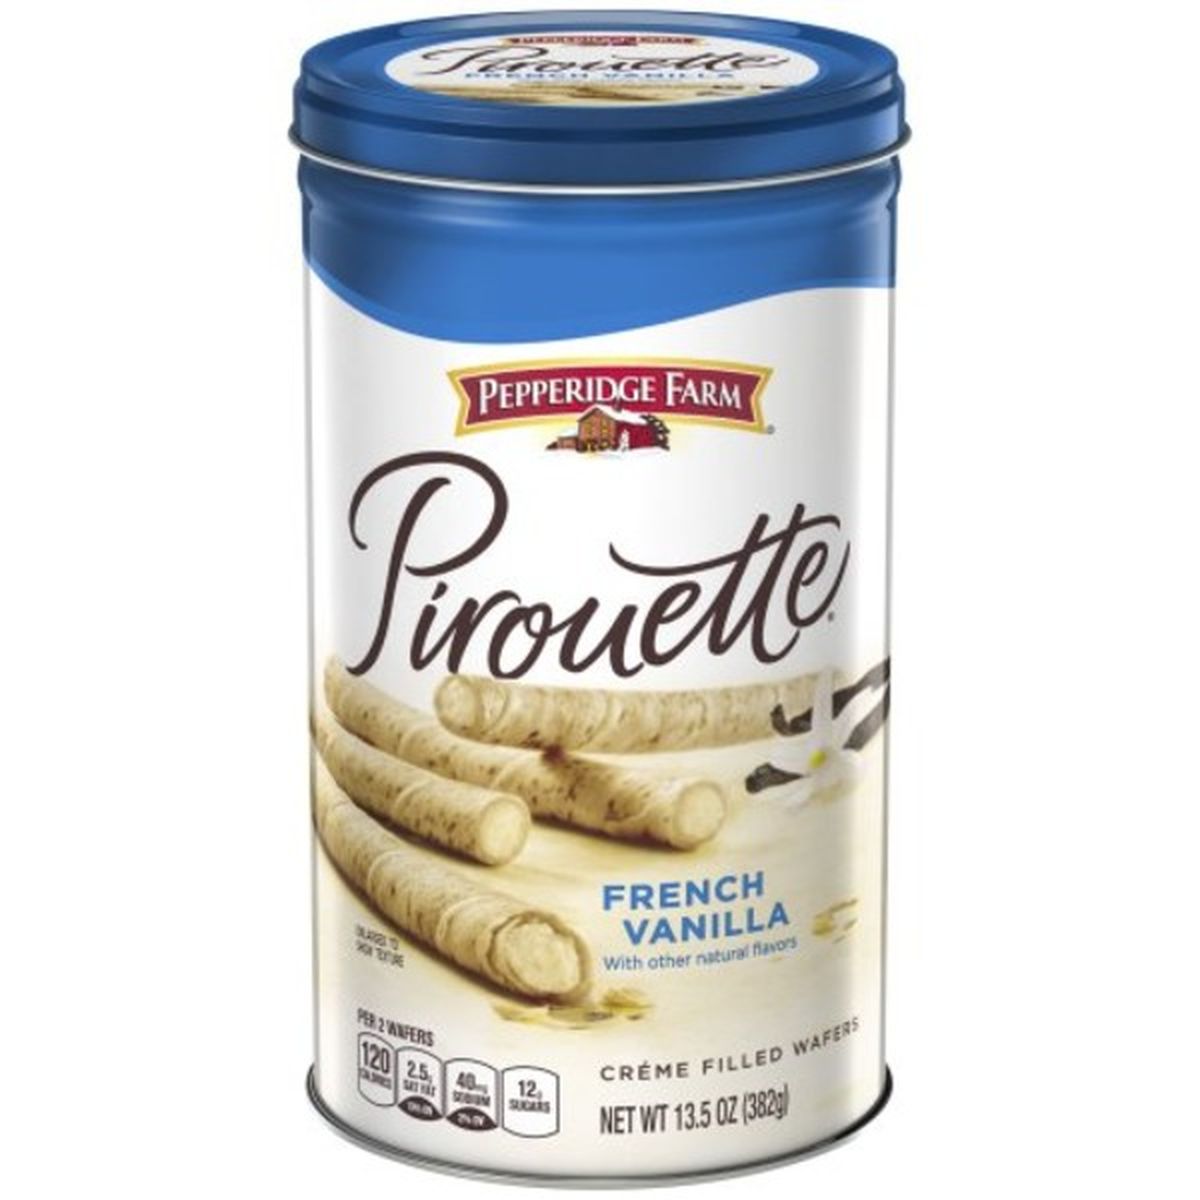 Calories in Pepperidge Farms  Pirouettes Pirouette Creme Filled Wafers French Vanilla Cookies